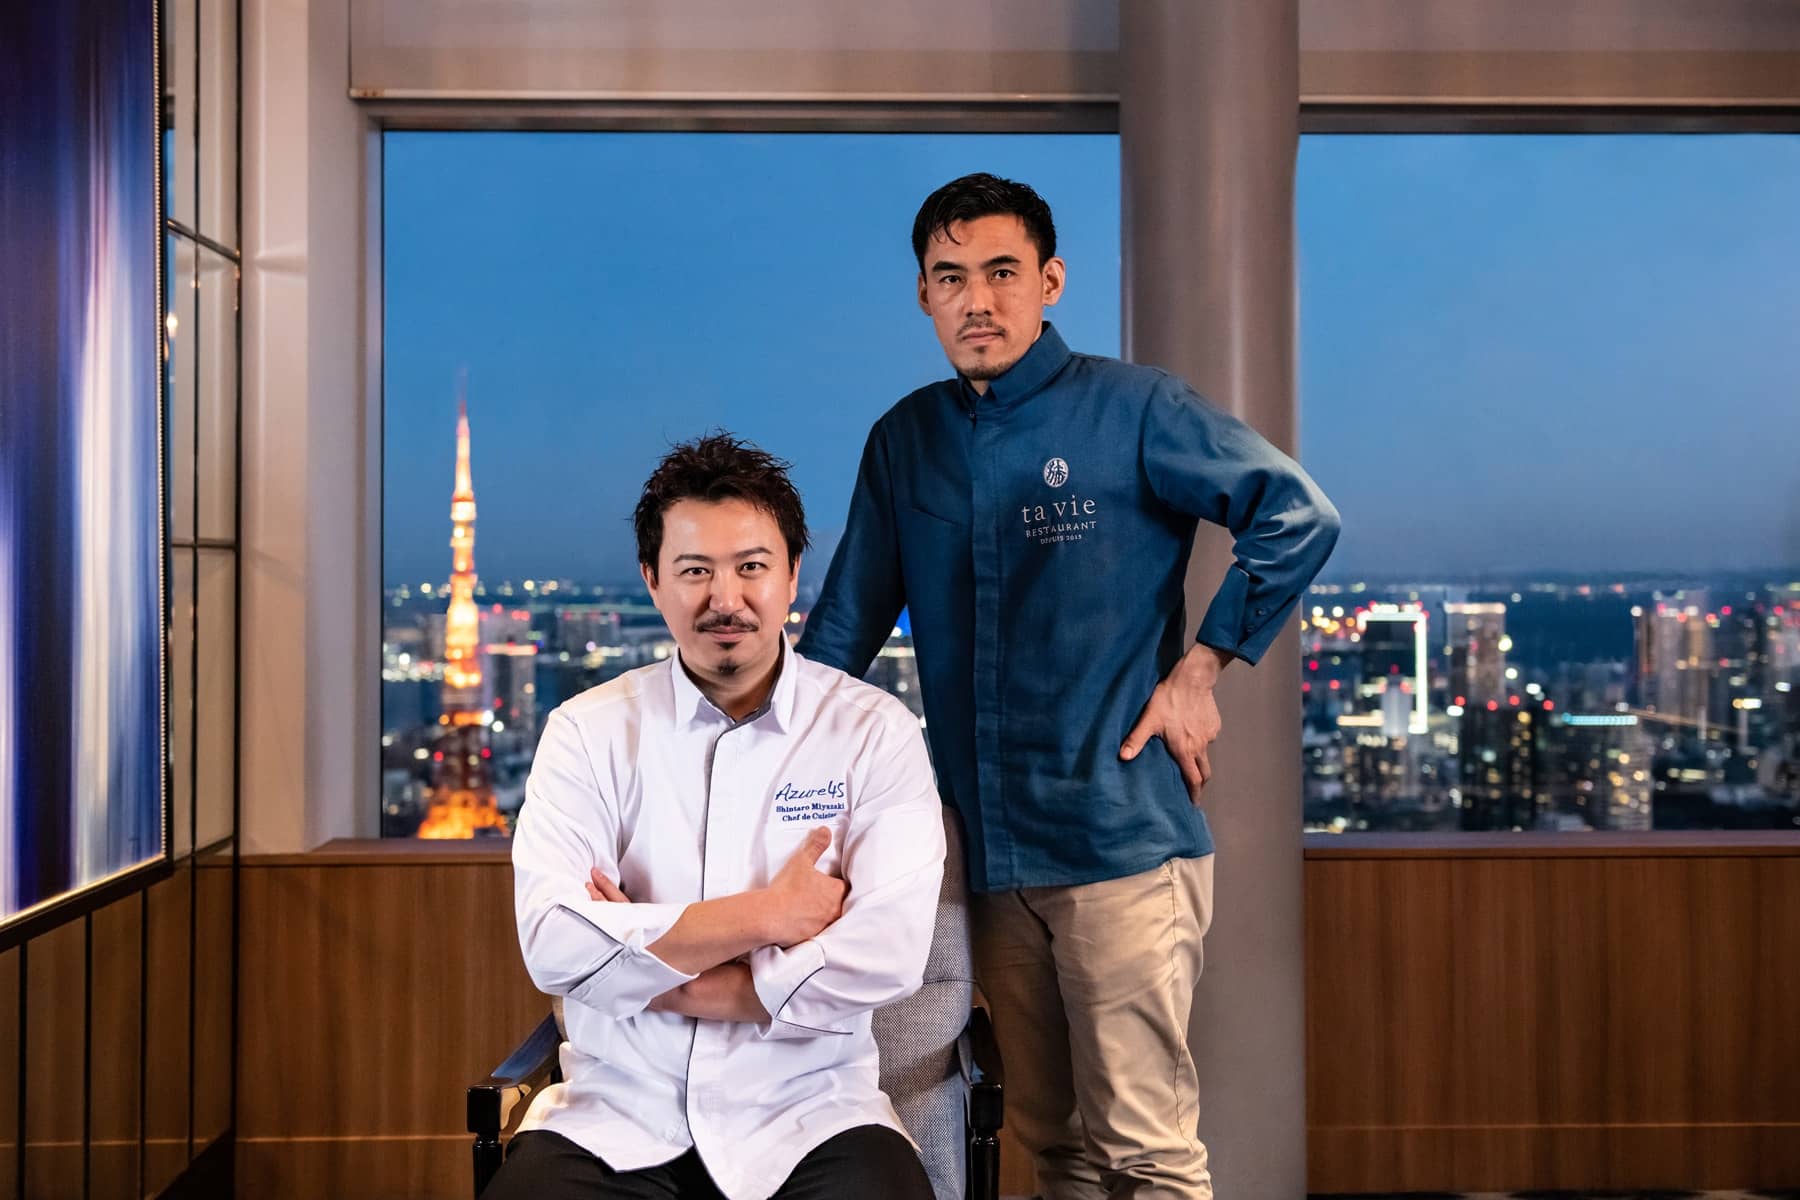 Michelin-starred chefs serve up fare with seasonal flair